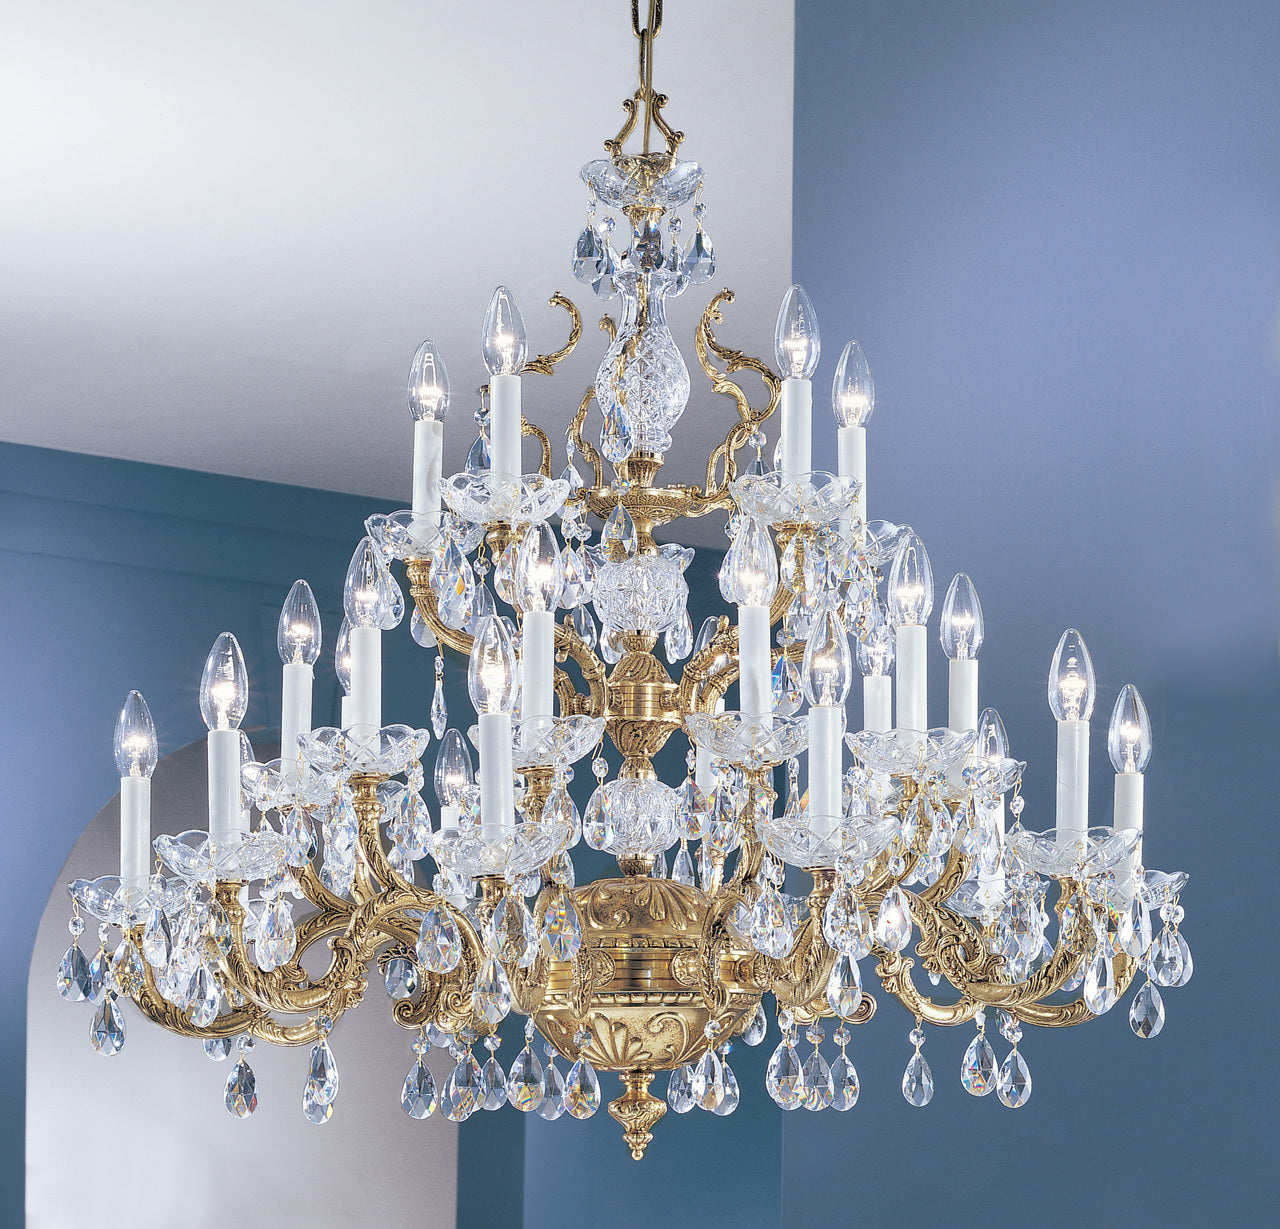 Classic Lighting 5535 OWB CGT Madrid Crystal/Cast Brass Chandelier in Olde World Bronze (Imported from Spain)